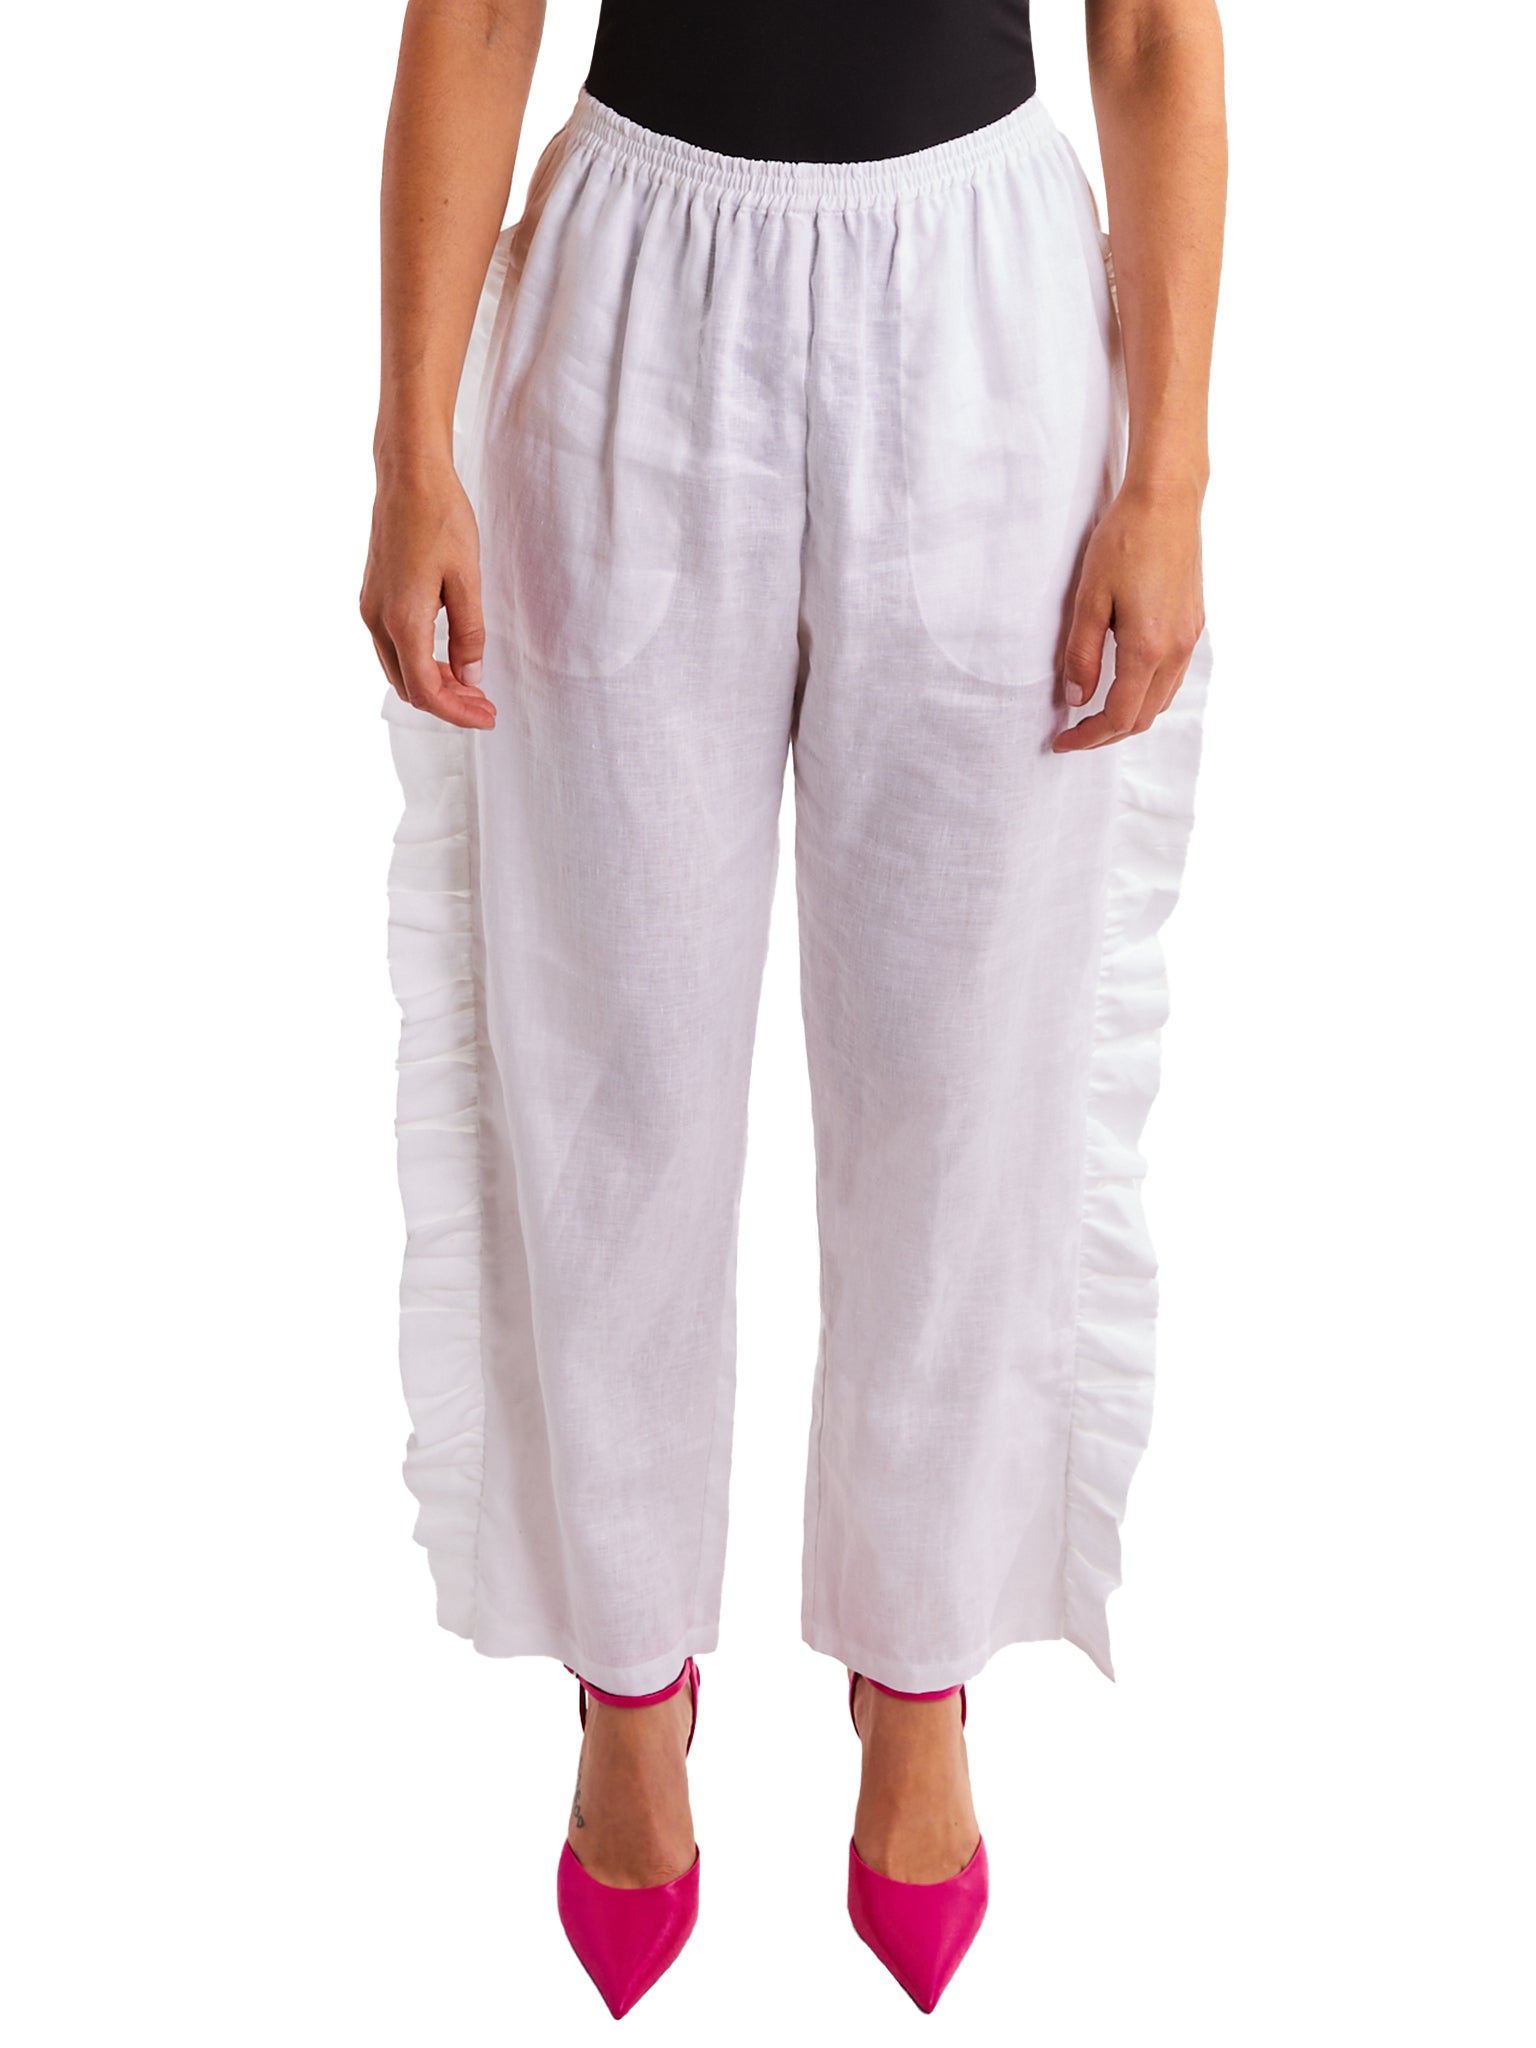 Buy Voeux India Ruffle trouser/Pants for women's at Amazon.in